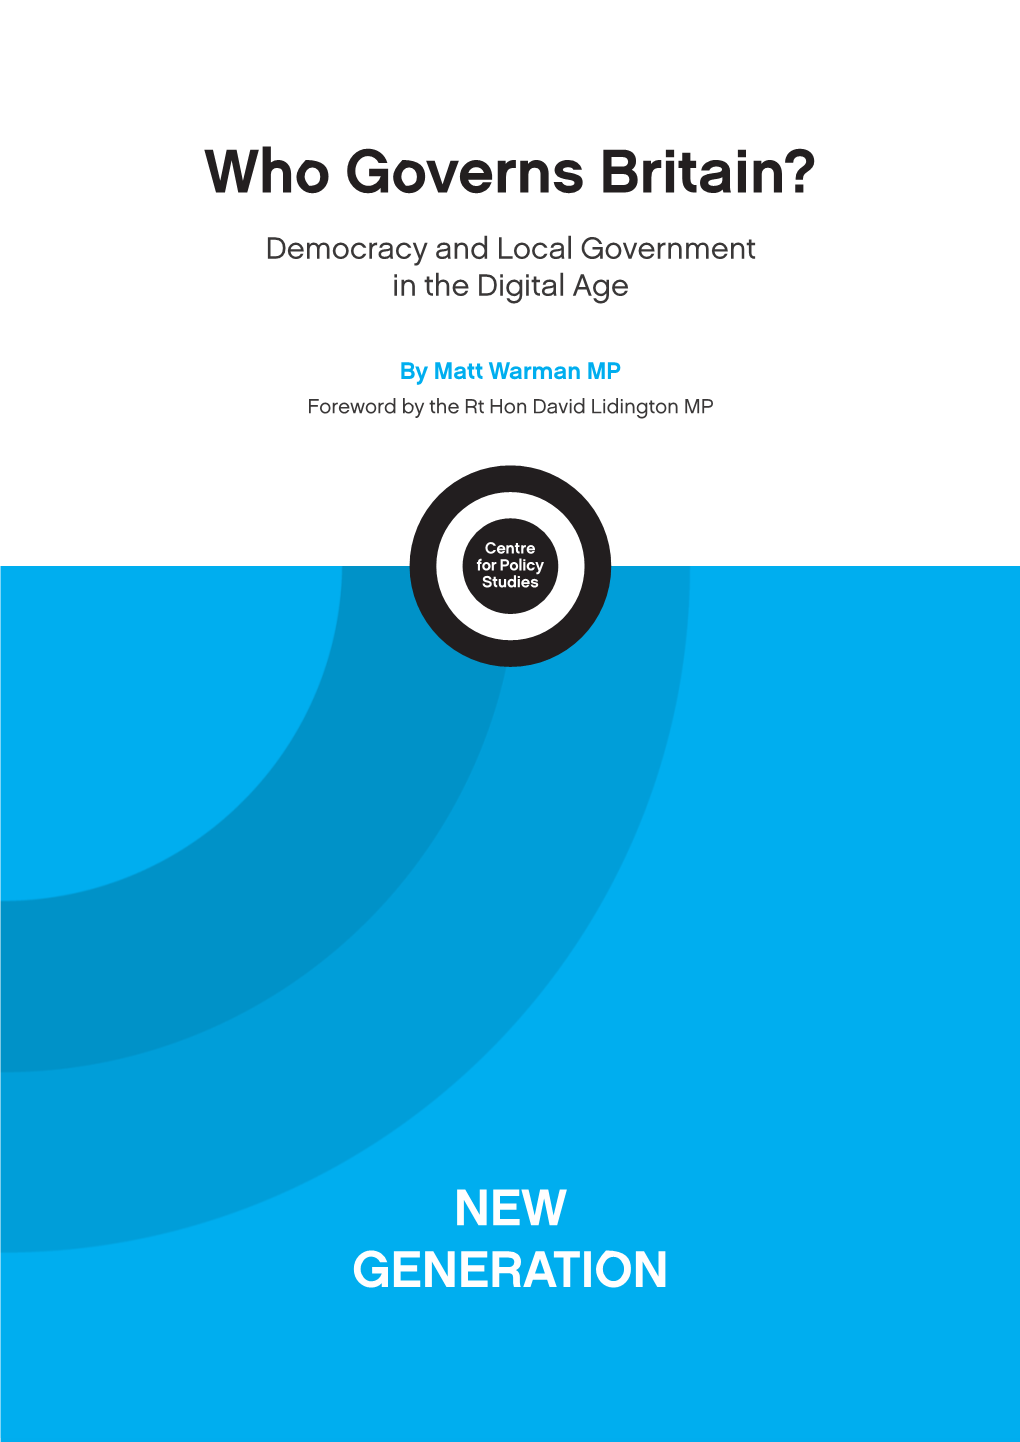 Who Governs Britain? Democracy and Local Government in the Digital Age